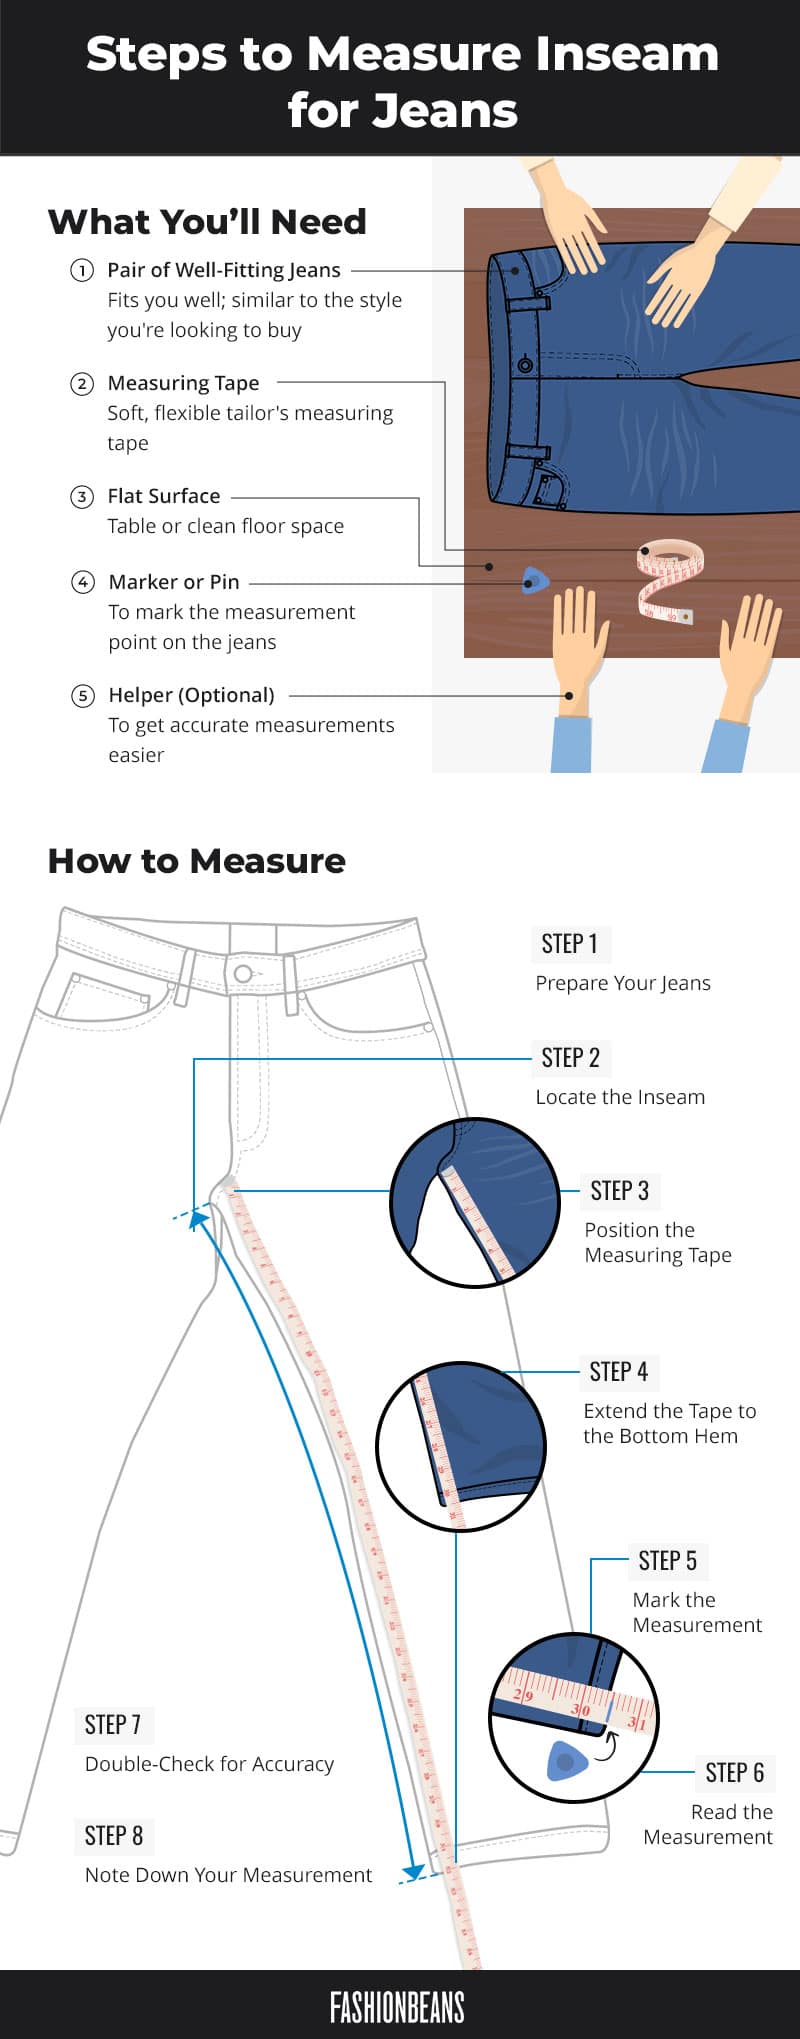 How to Measure Inseam for Jeans